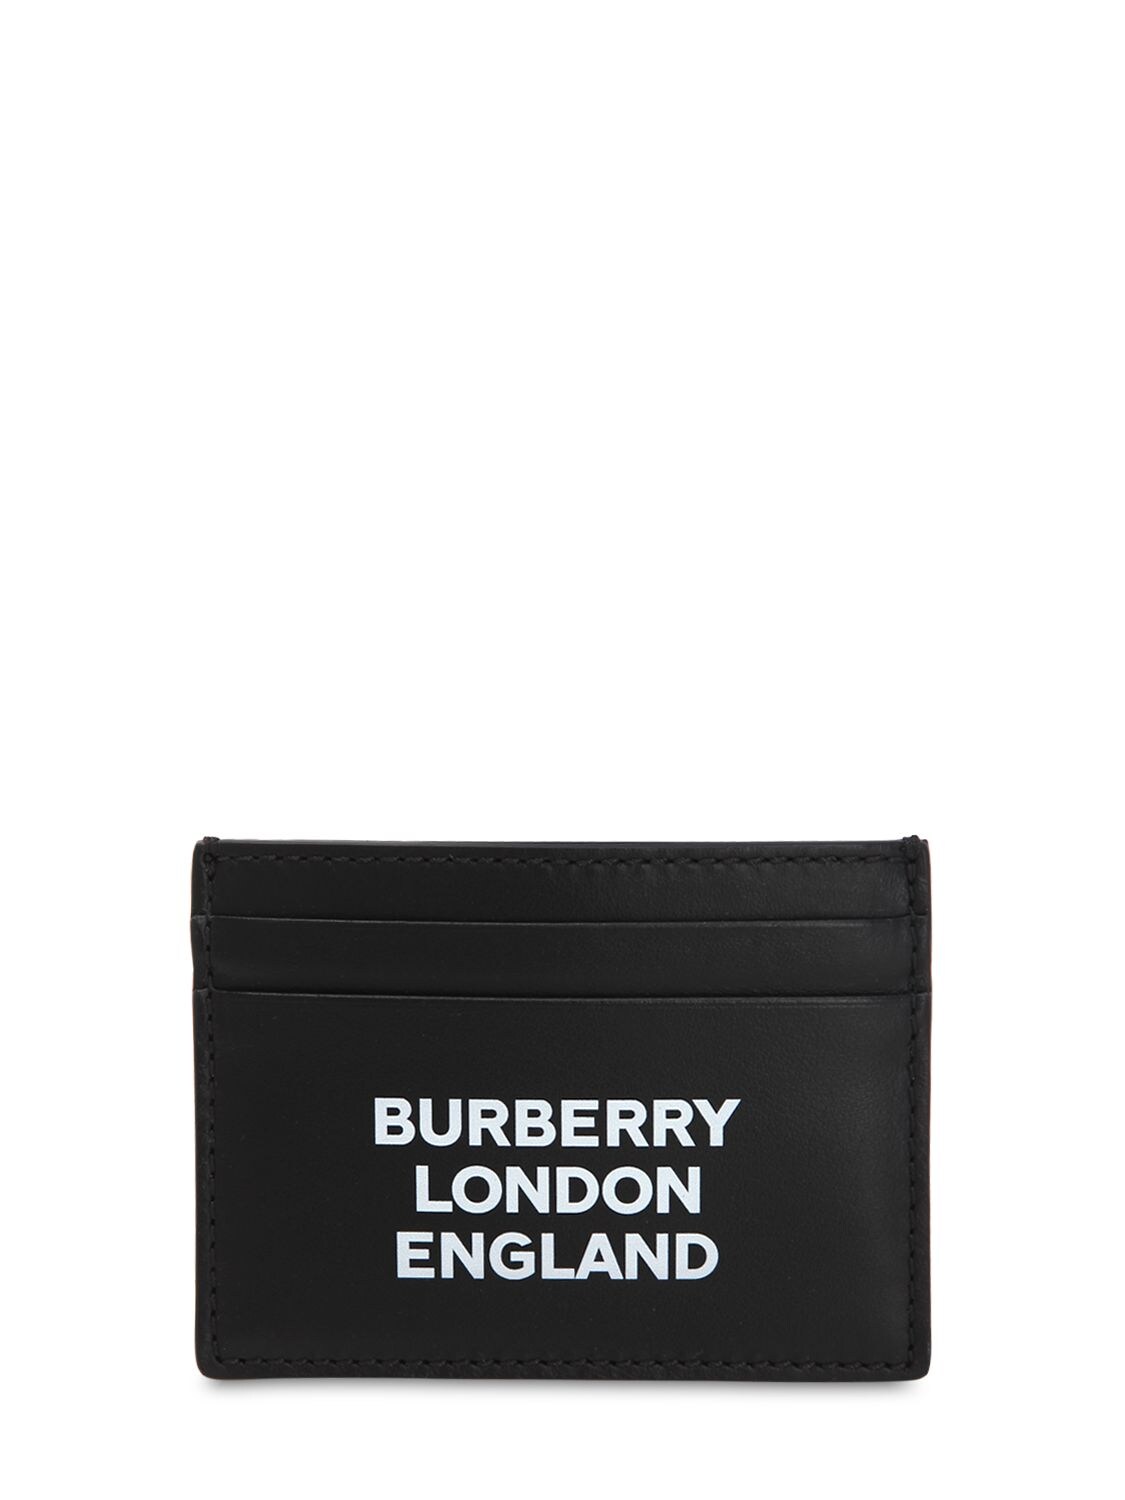 BURBERRY PRINTED LEATHER CARD HOLDER,69IJT0005-QTEXODK1